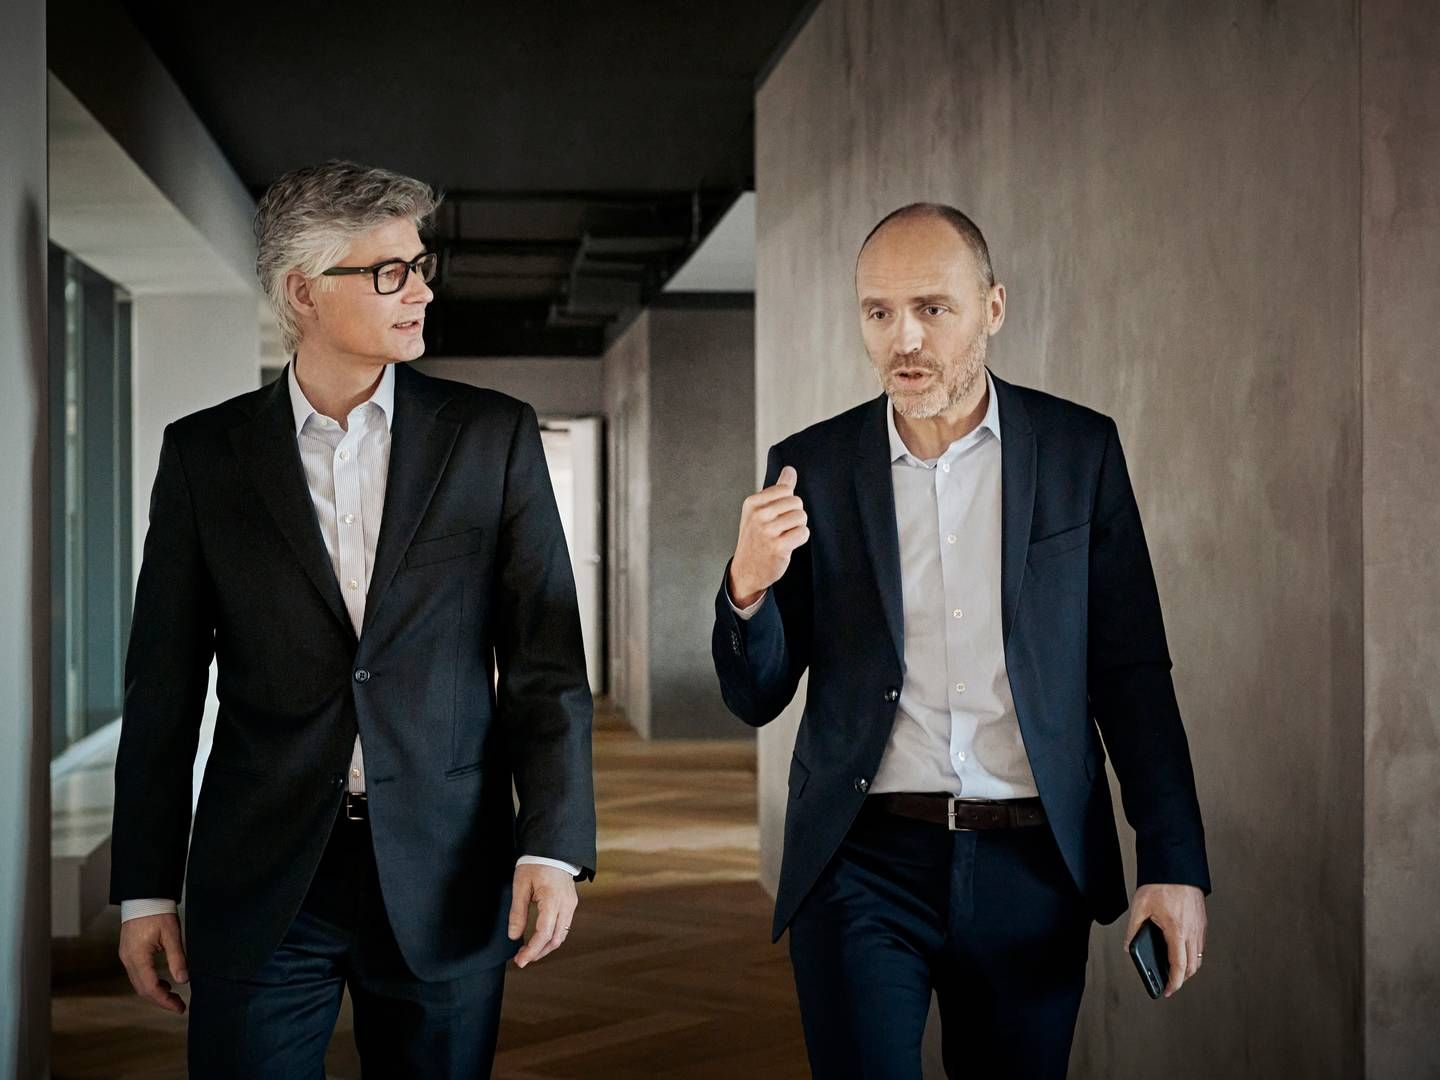 The founders of Capital Four, Torben Skødeberg and Sandro Näf. | Photo: PR: Capital Four